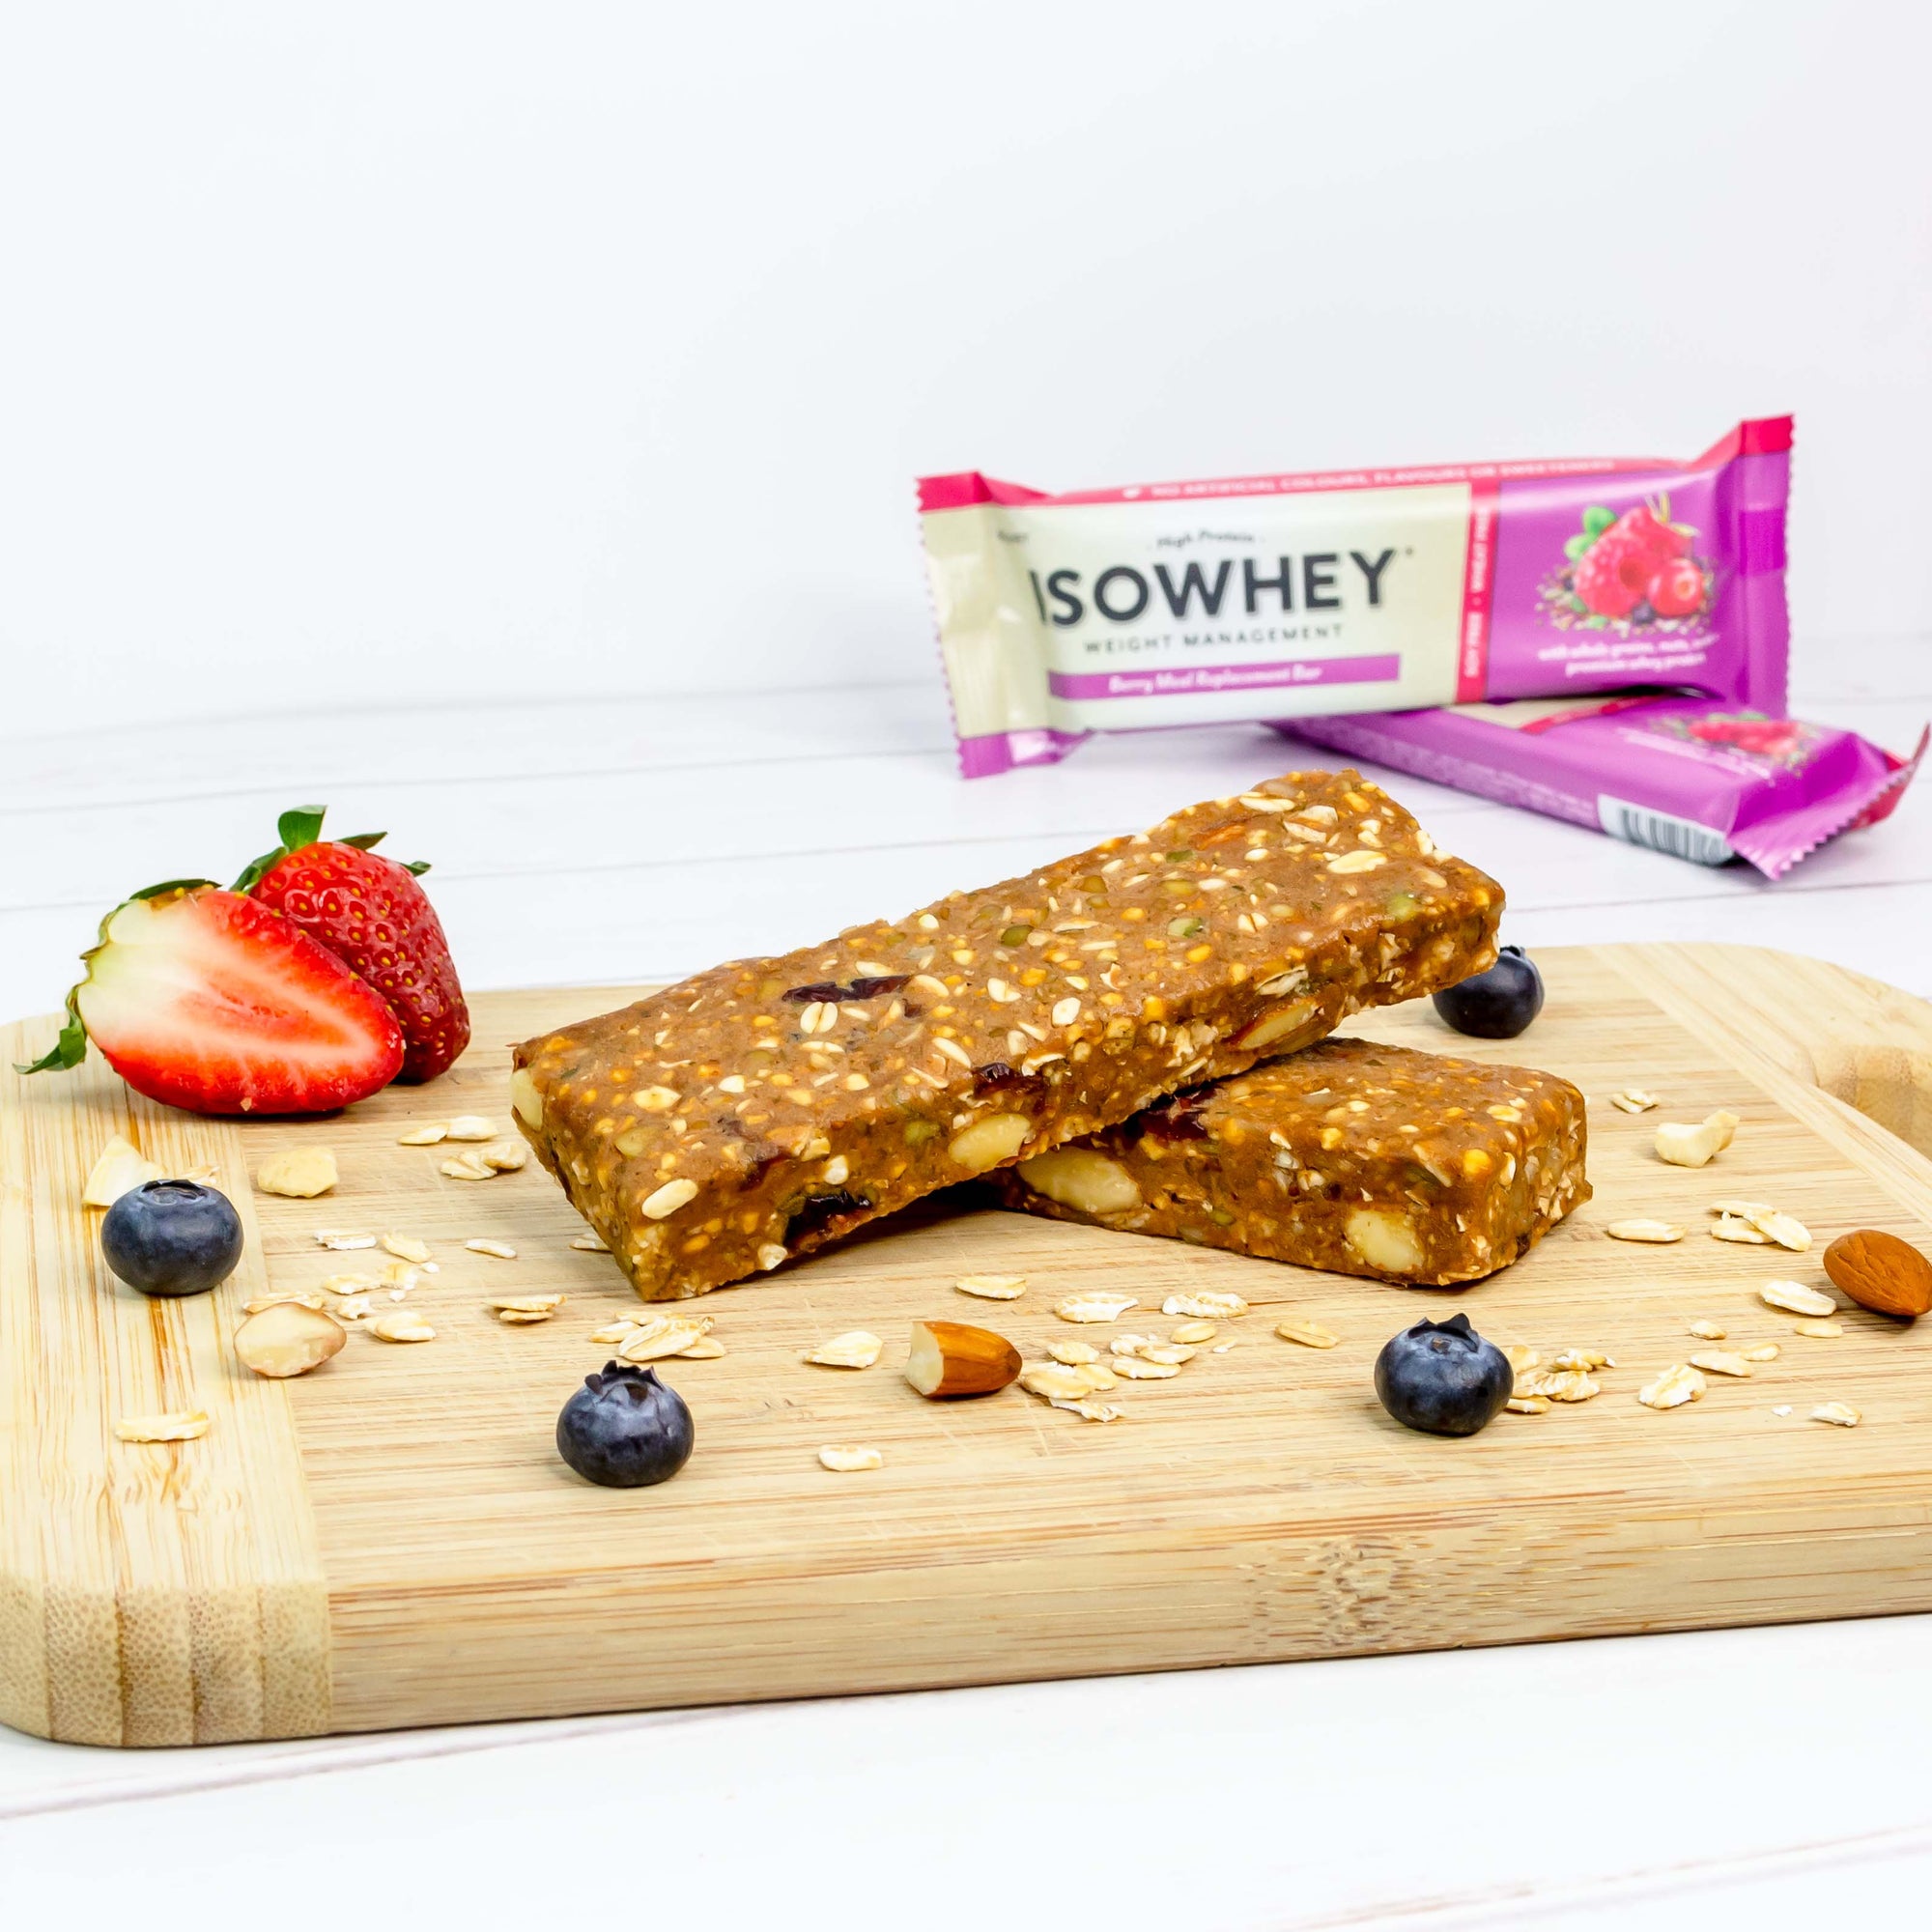 IsoWhey Meal Replacement Bar: Berry